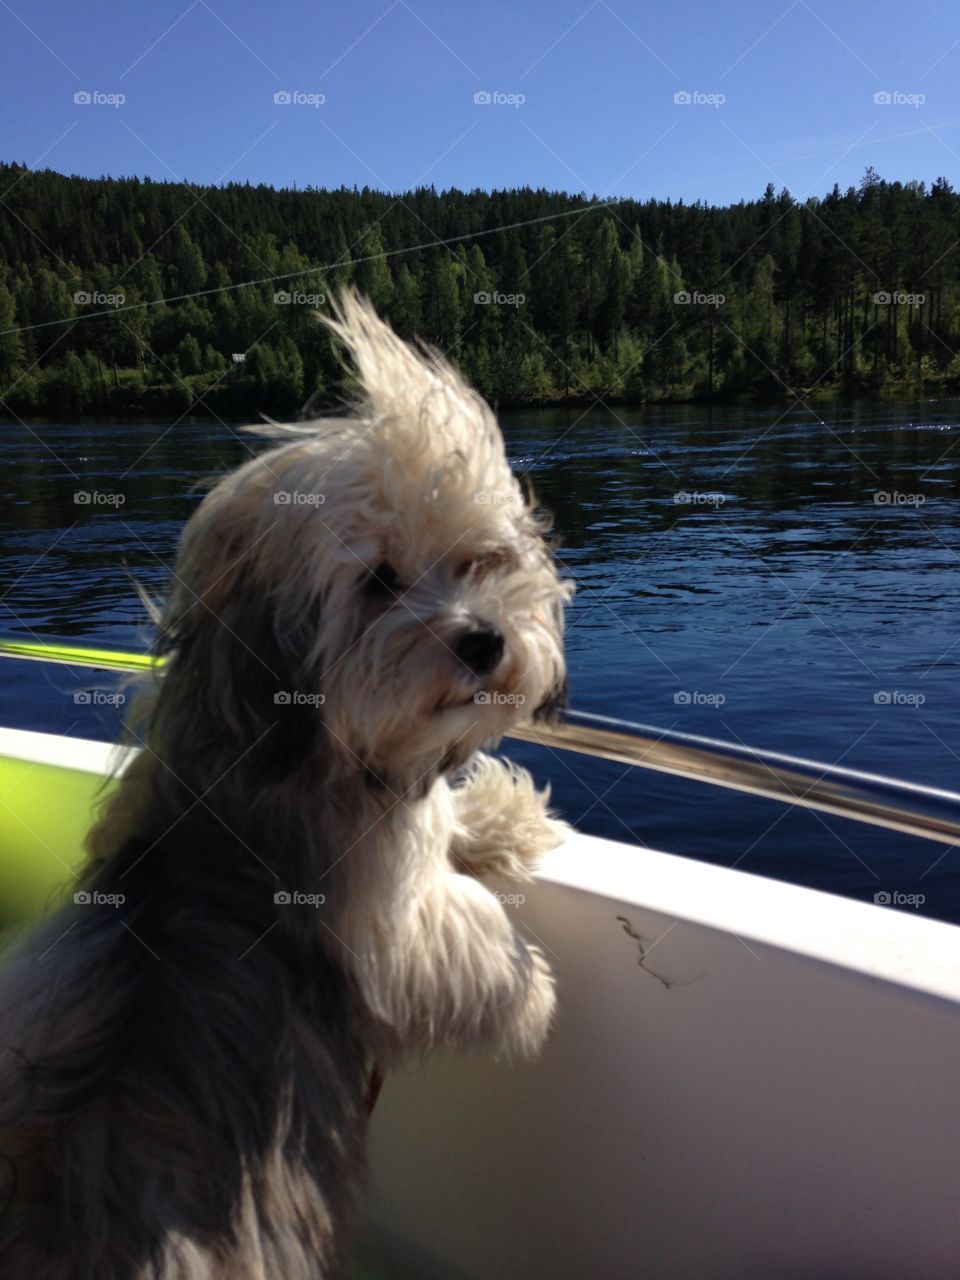 Dog in a boat. Our dog with the wind i his hair!